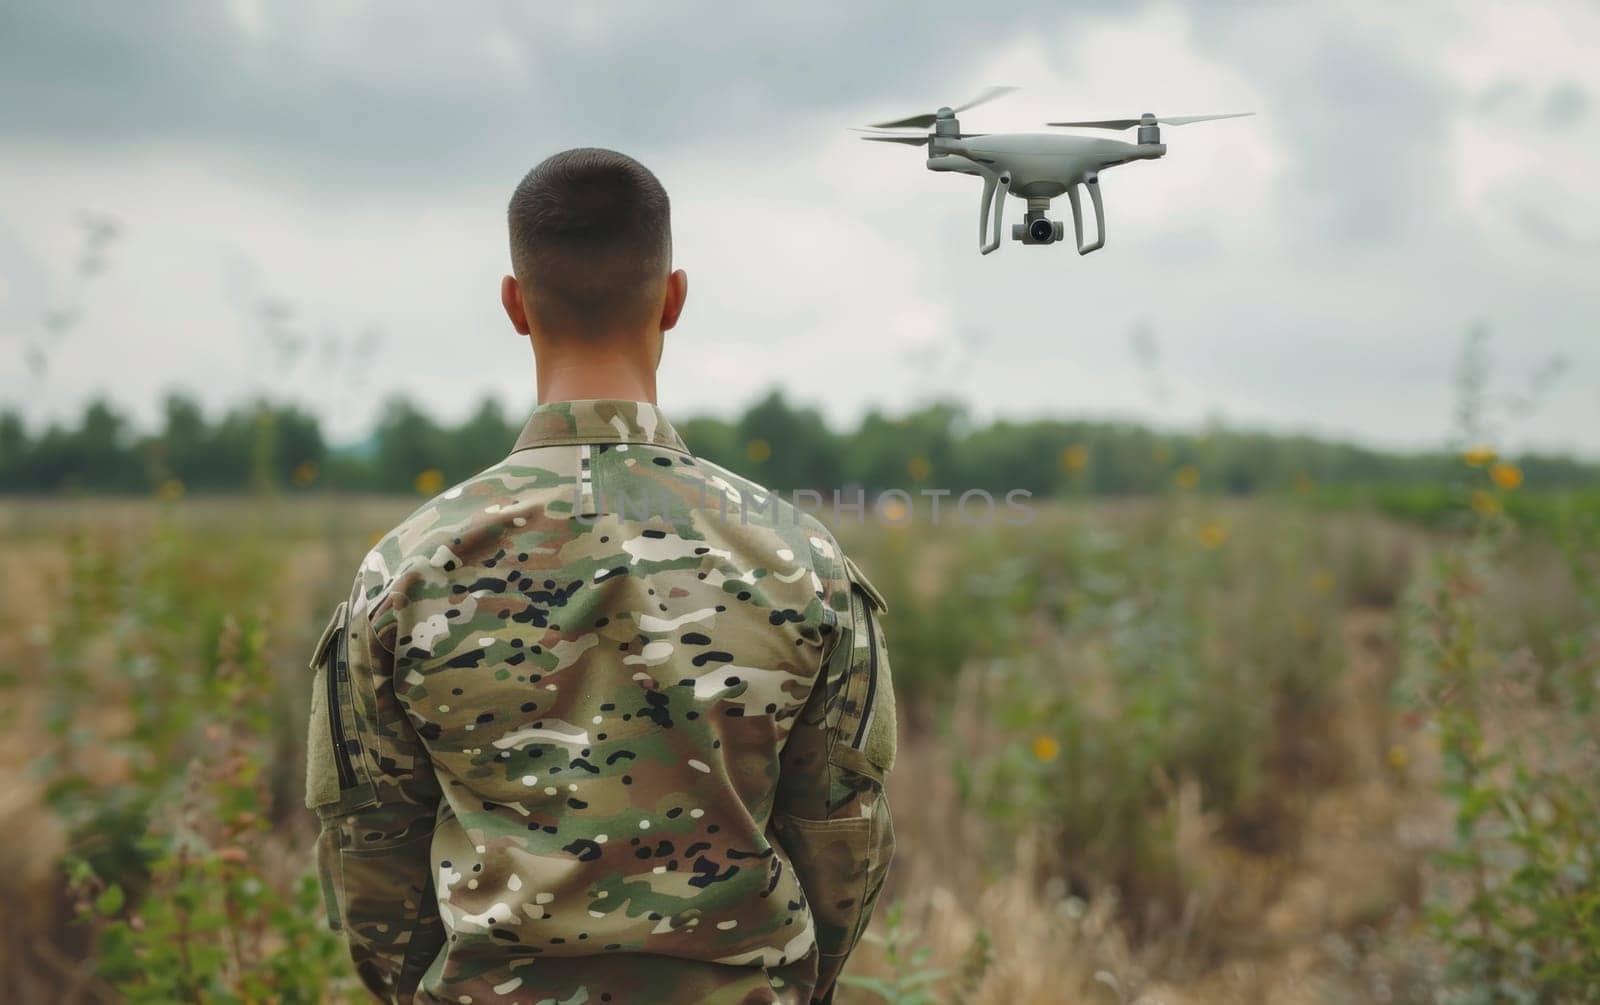 A military personnel stands focused as he controls a drone over a wildflower-dotted field, signaling a blend of natural beauty and technological advancement. Drone operator at war